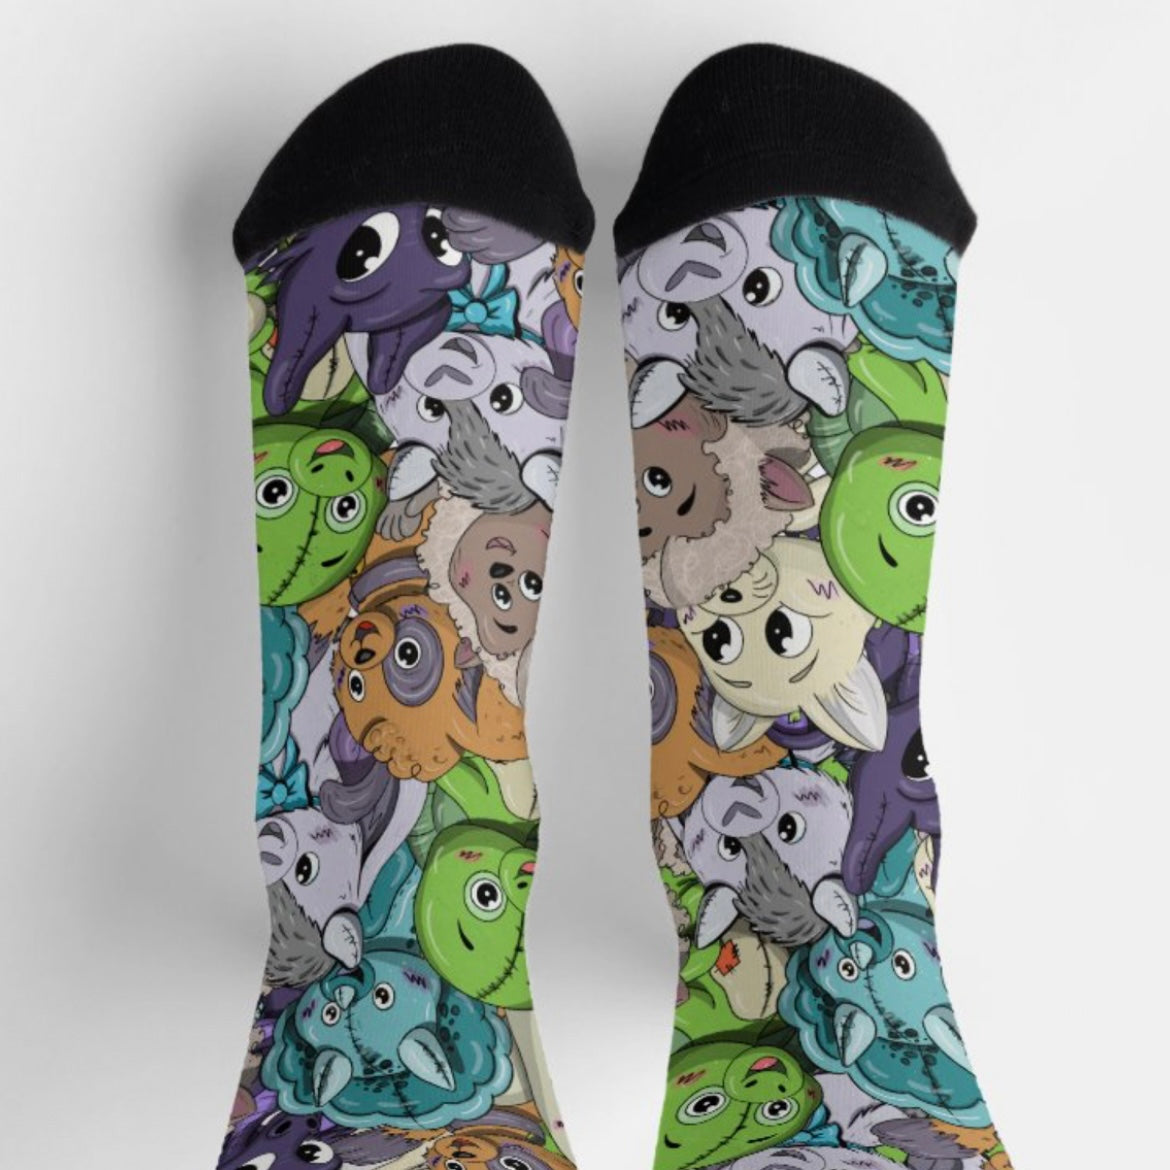 Topsy and Friends Socks